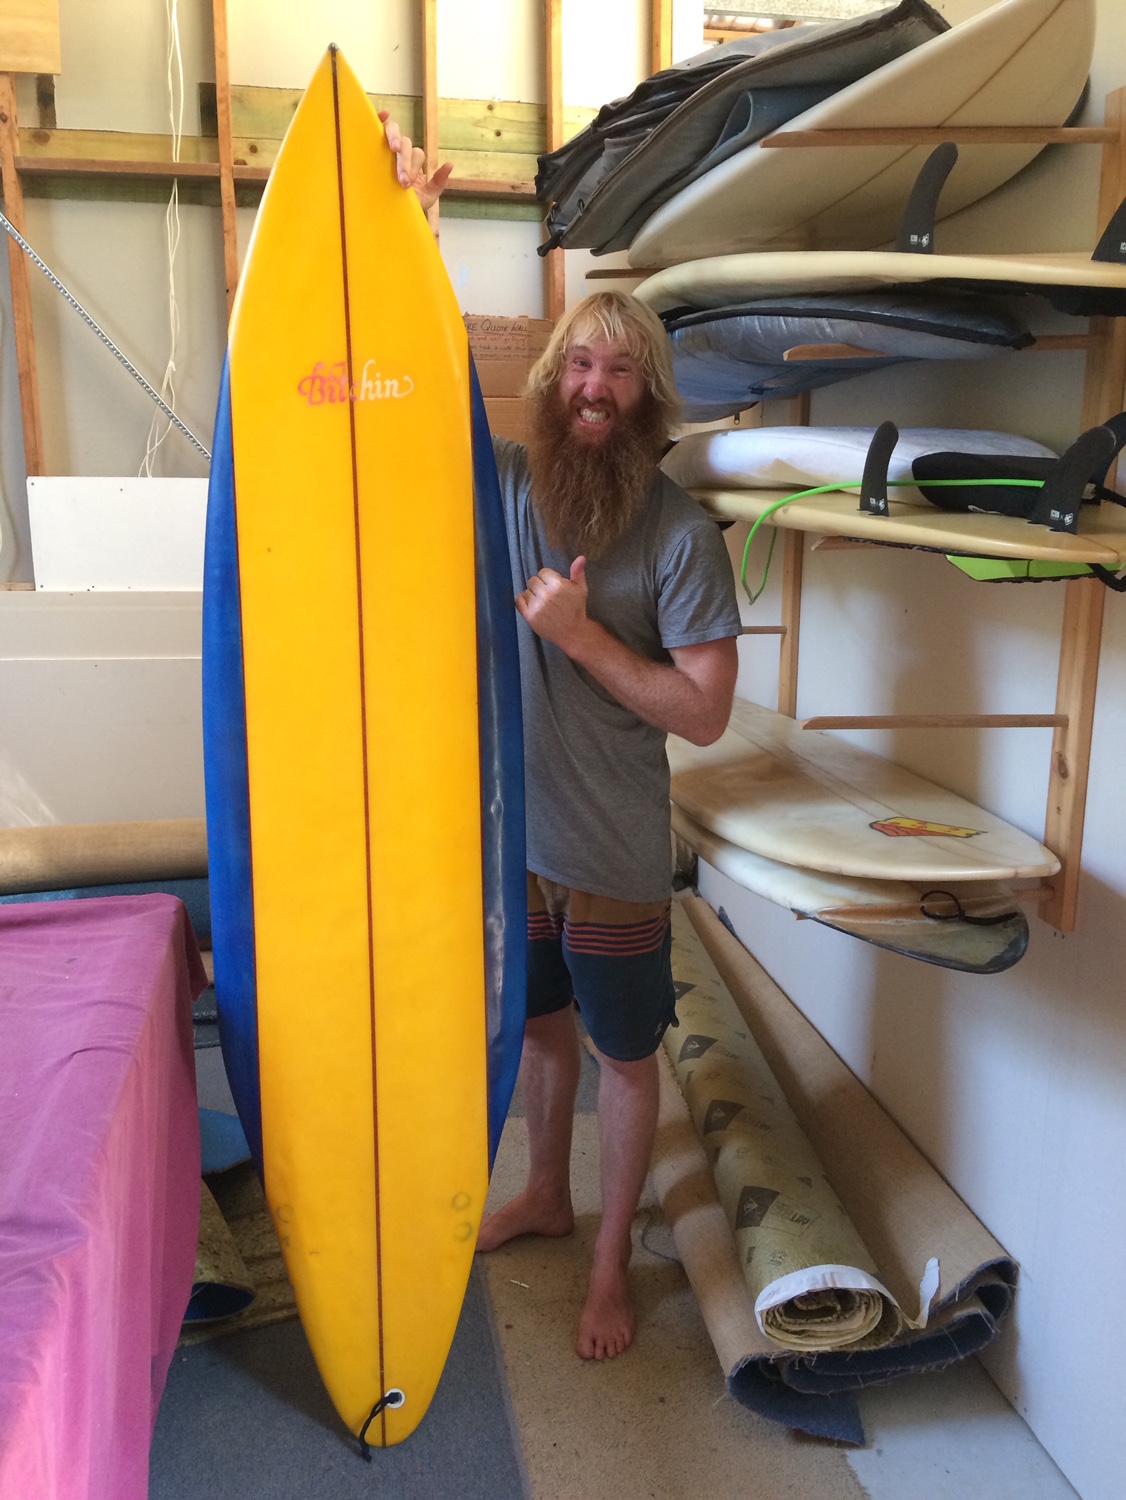 Treasured surfboard found at Bermagui 15 years after it was stolen